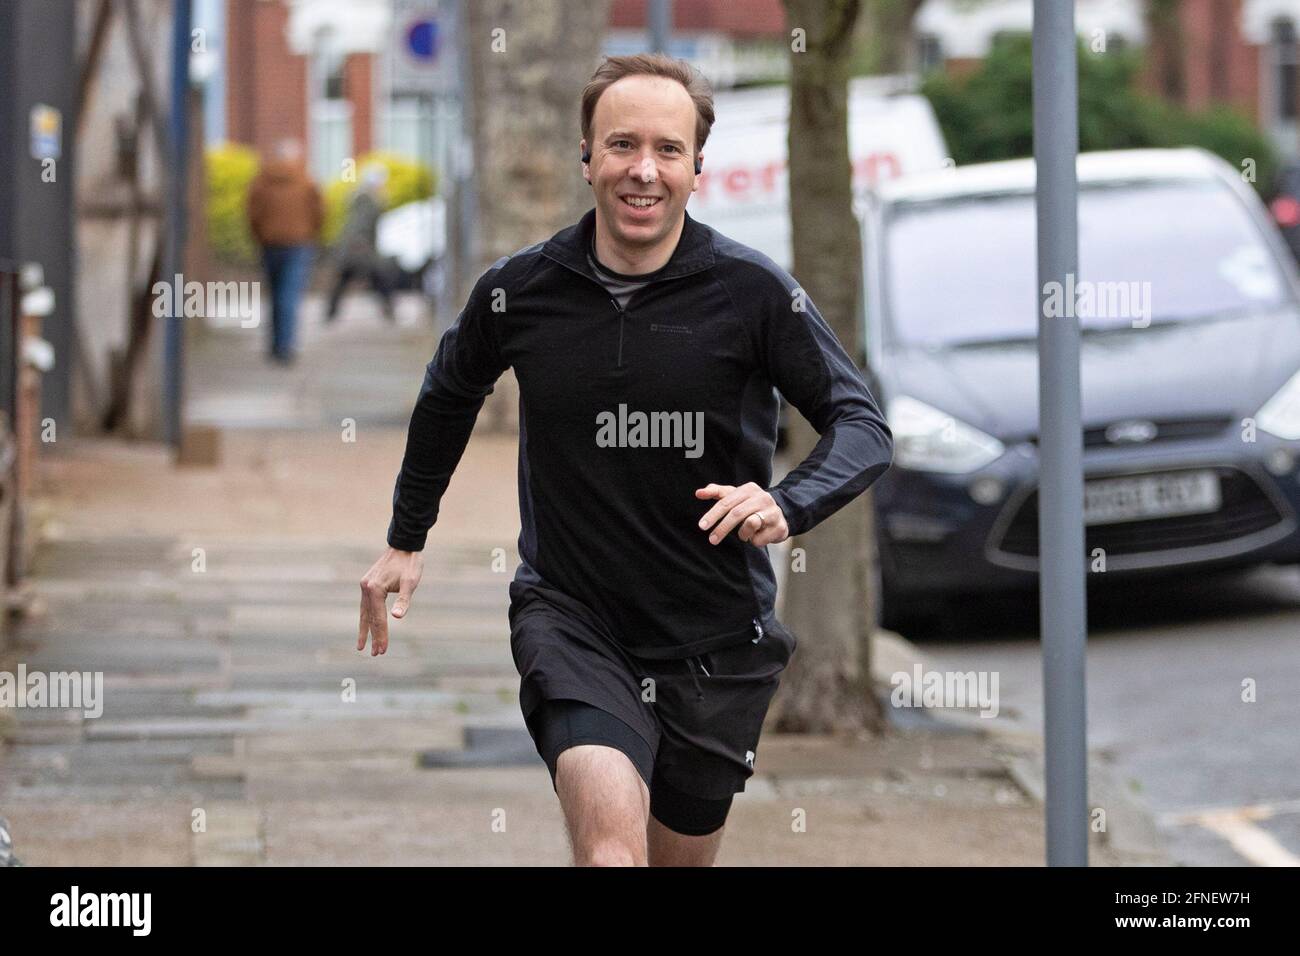 Health Secretary Matt Hancock is seen smiling as he leaves his West London home for a jog, on the 17th of May 2021, as the Lockdown rules in England, Stock Photo